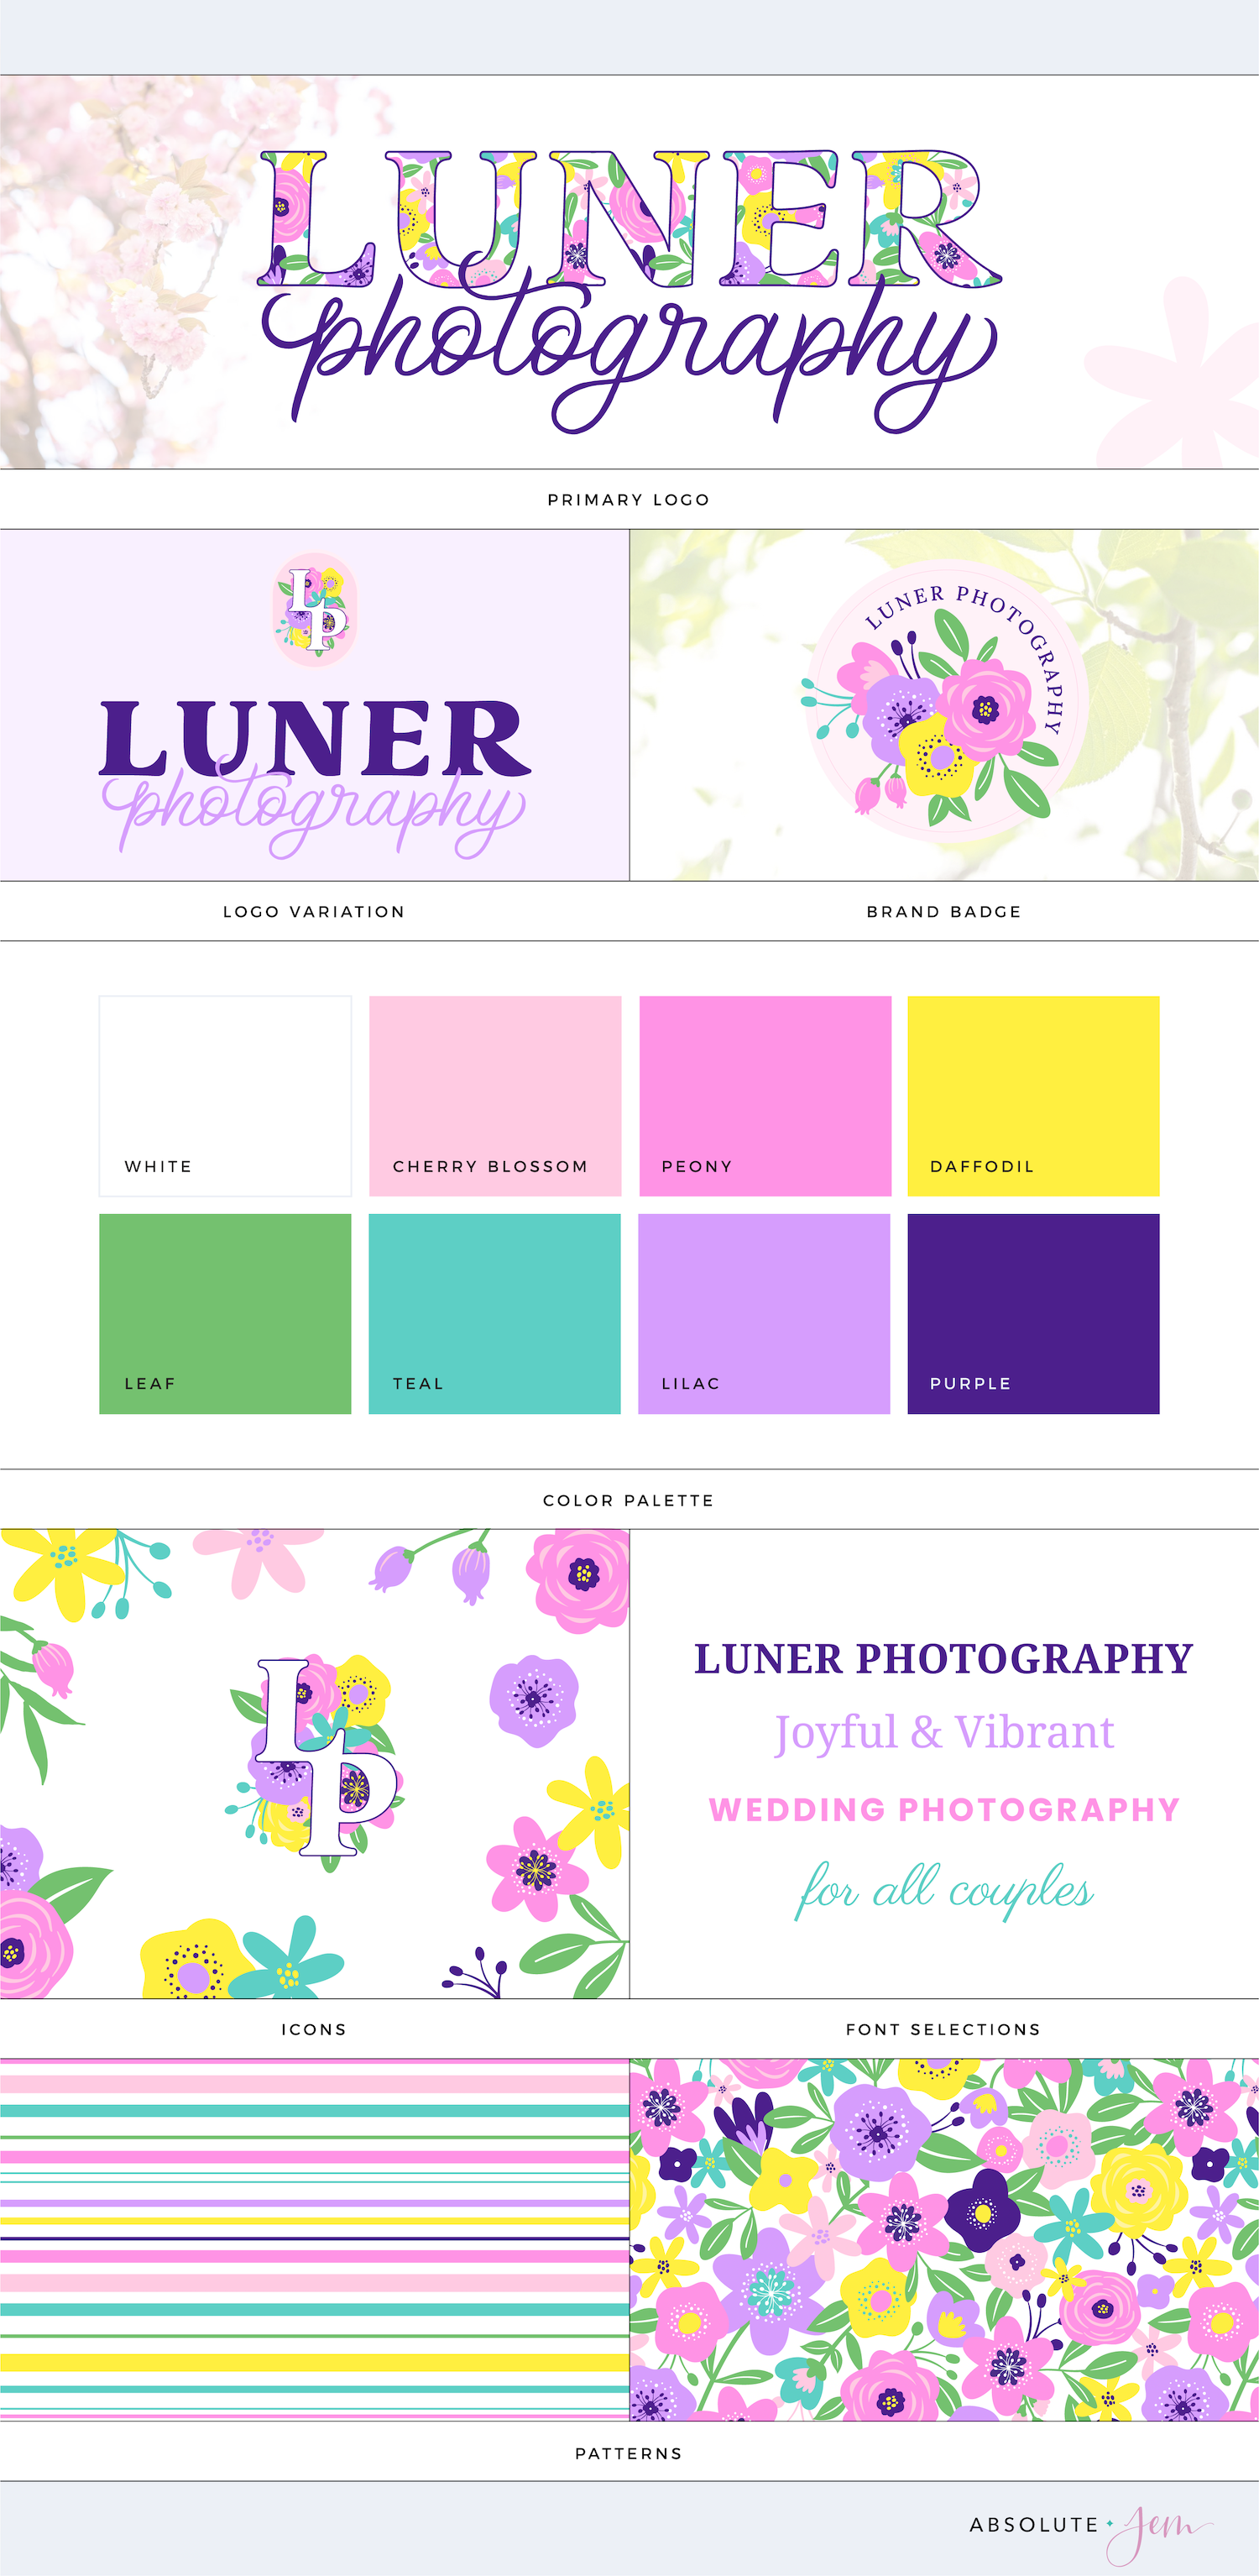 Colorful Floral Brand Board for Luner Photography | Design by Absolute JEM